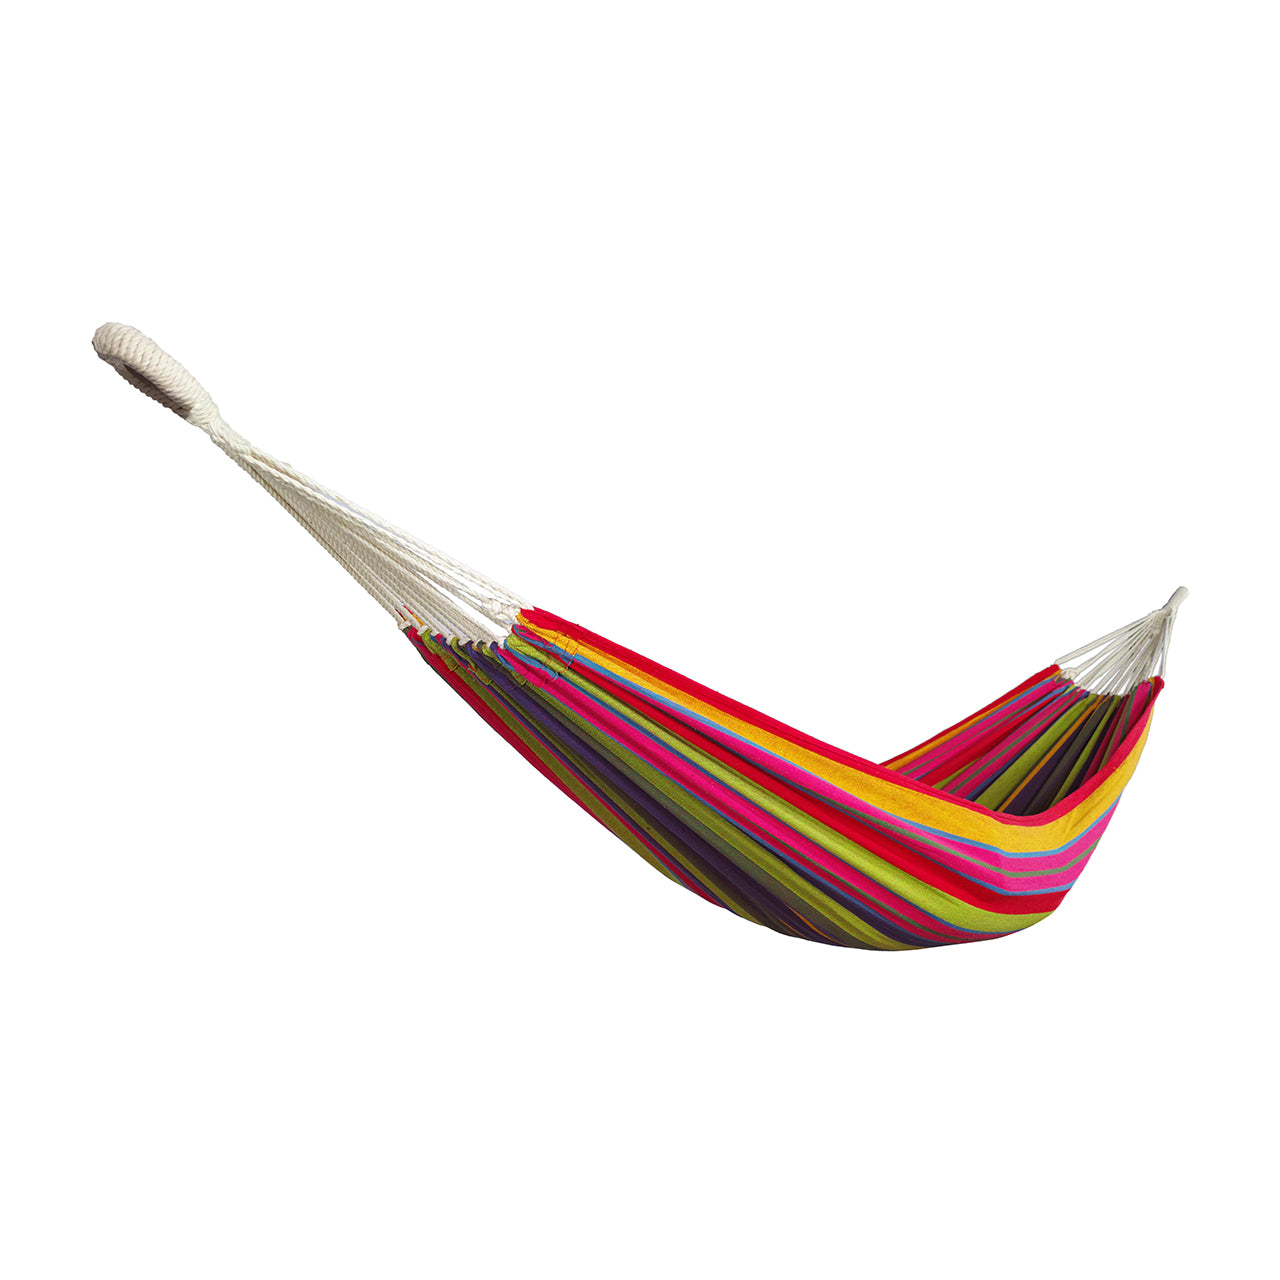 Bliss Hammocks 40-inch Wide Hammock in a Bag with Hand-woven Rope loops in the Mardi Gras variation.